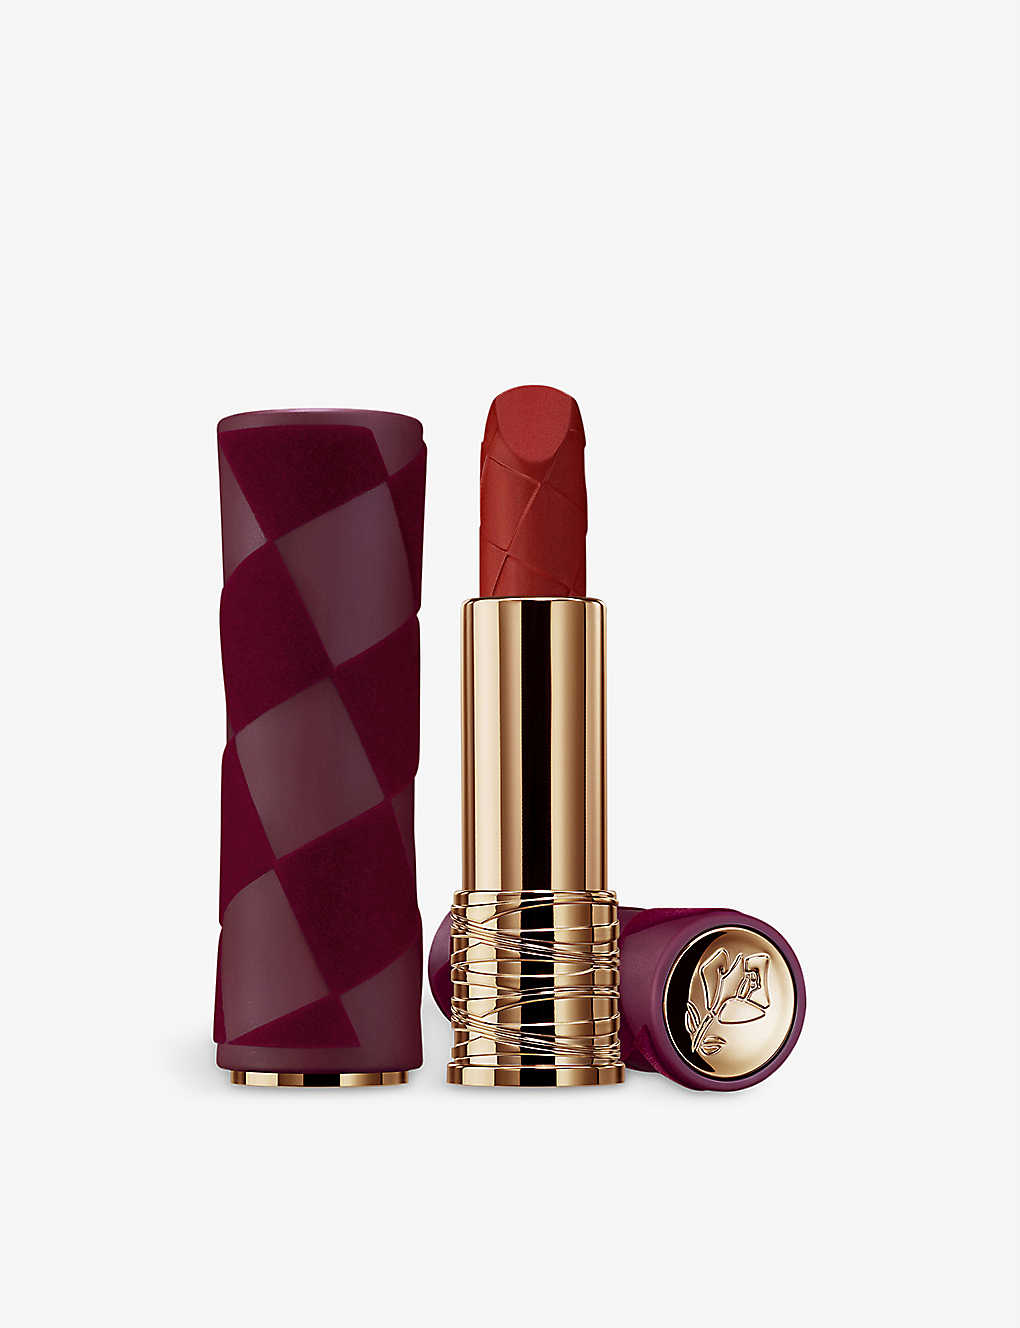 Lancôme L'absolu Rouge Intimatte Limited-edition Matte Lipstick 3.4g In Red